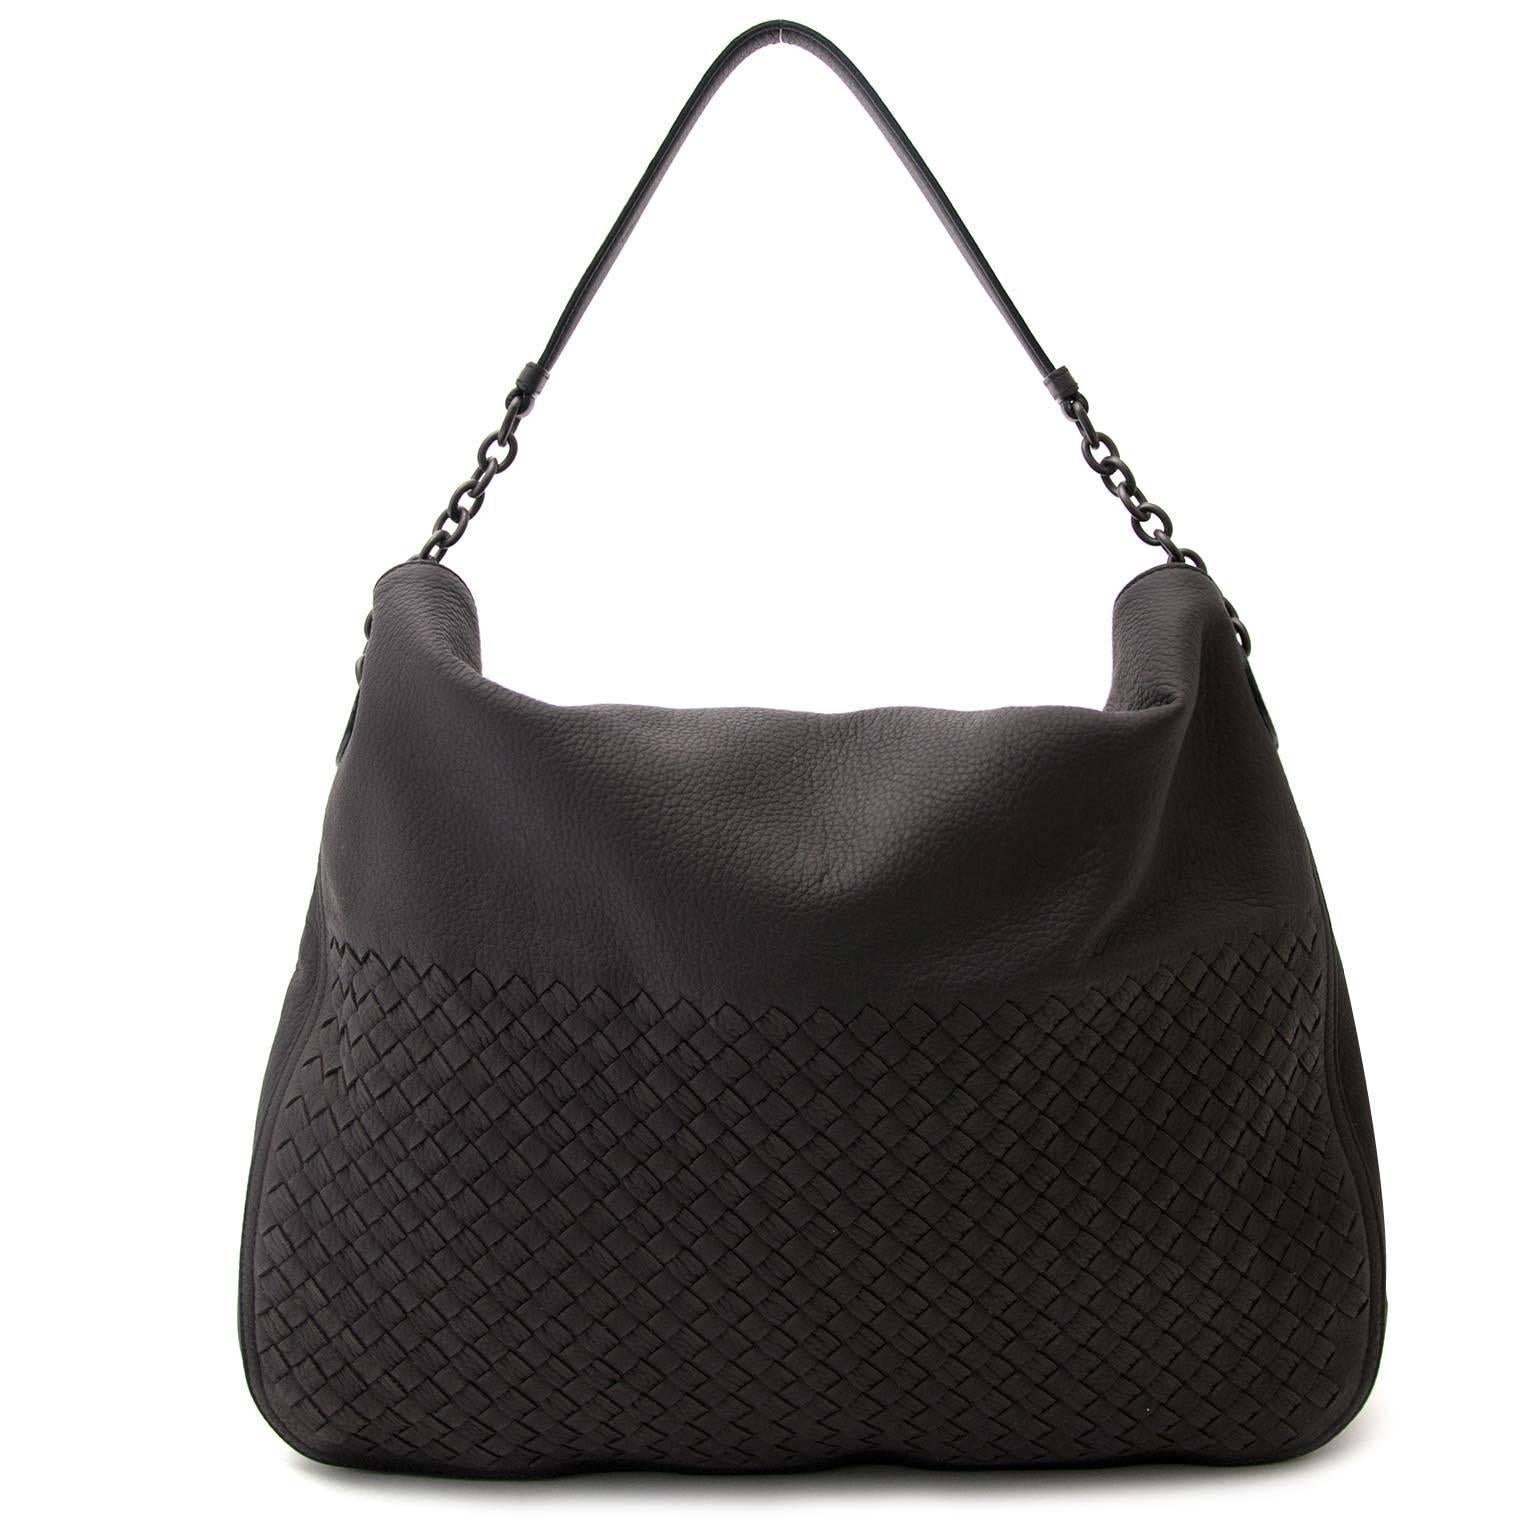 Excellent condition

Bottega Veneta Intrecciato Dark Brown Leather Shoulder Bag

The perfect shoulder bag has just landed. Bottega Veneta is know for their amazing handwork.
This woven bag is a very good example of their craftmanship. The leather